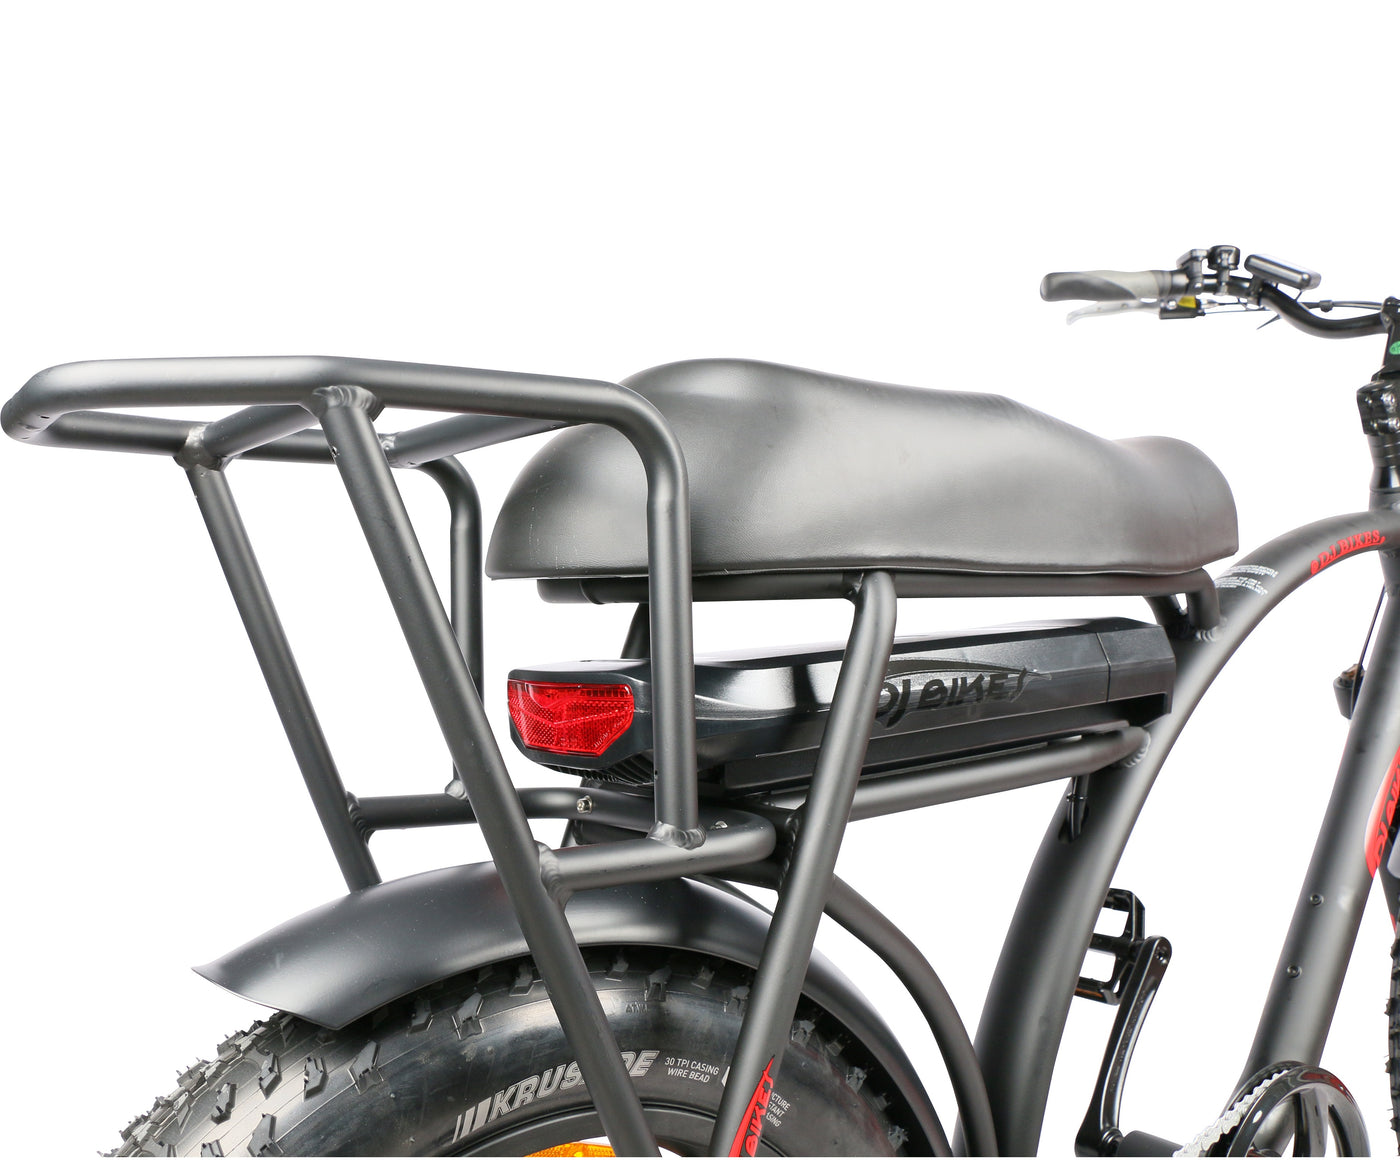 Redesigned DJ Super Bike from DJ Bikes now sports a rear rack for gear